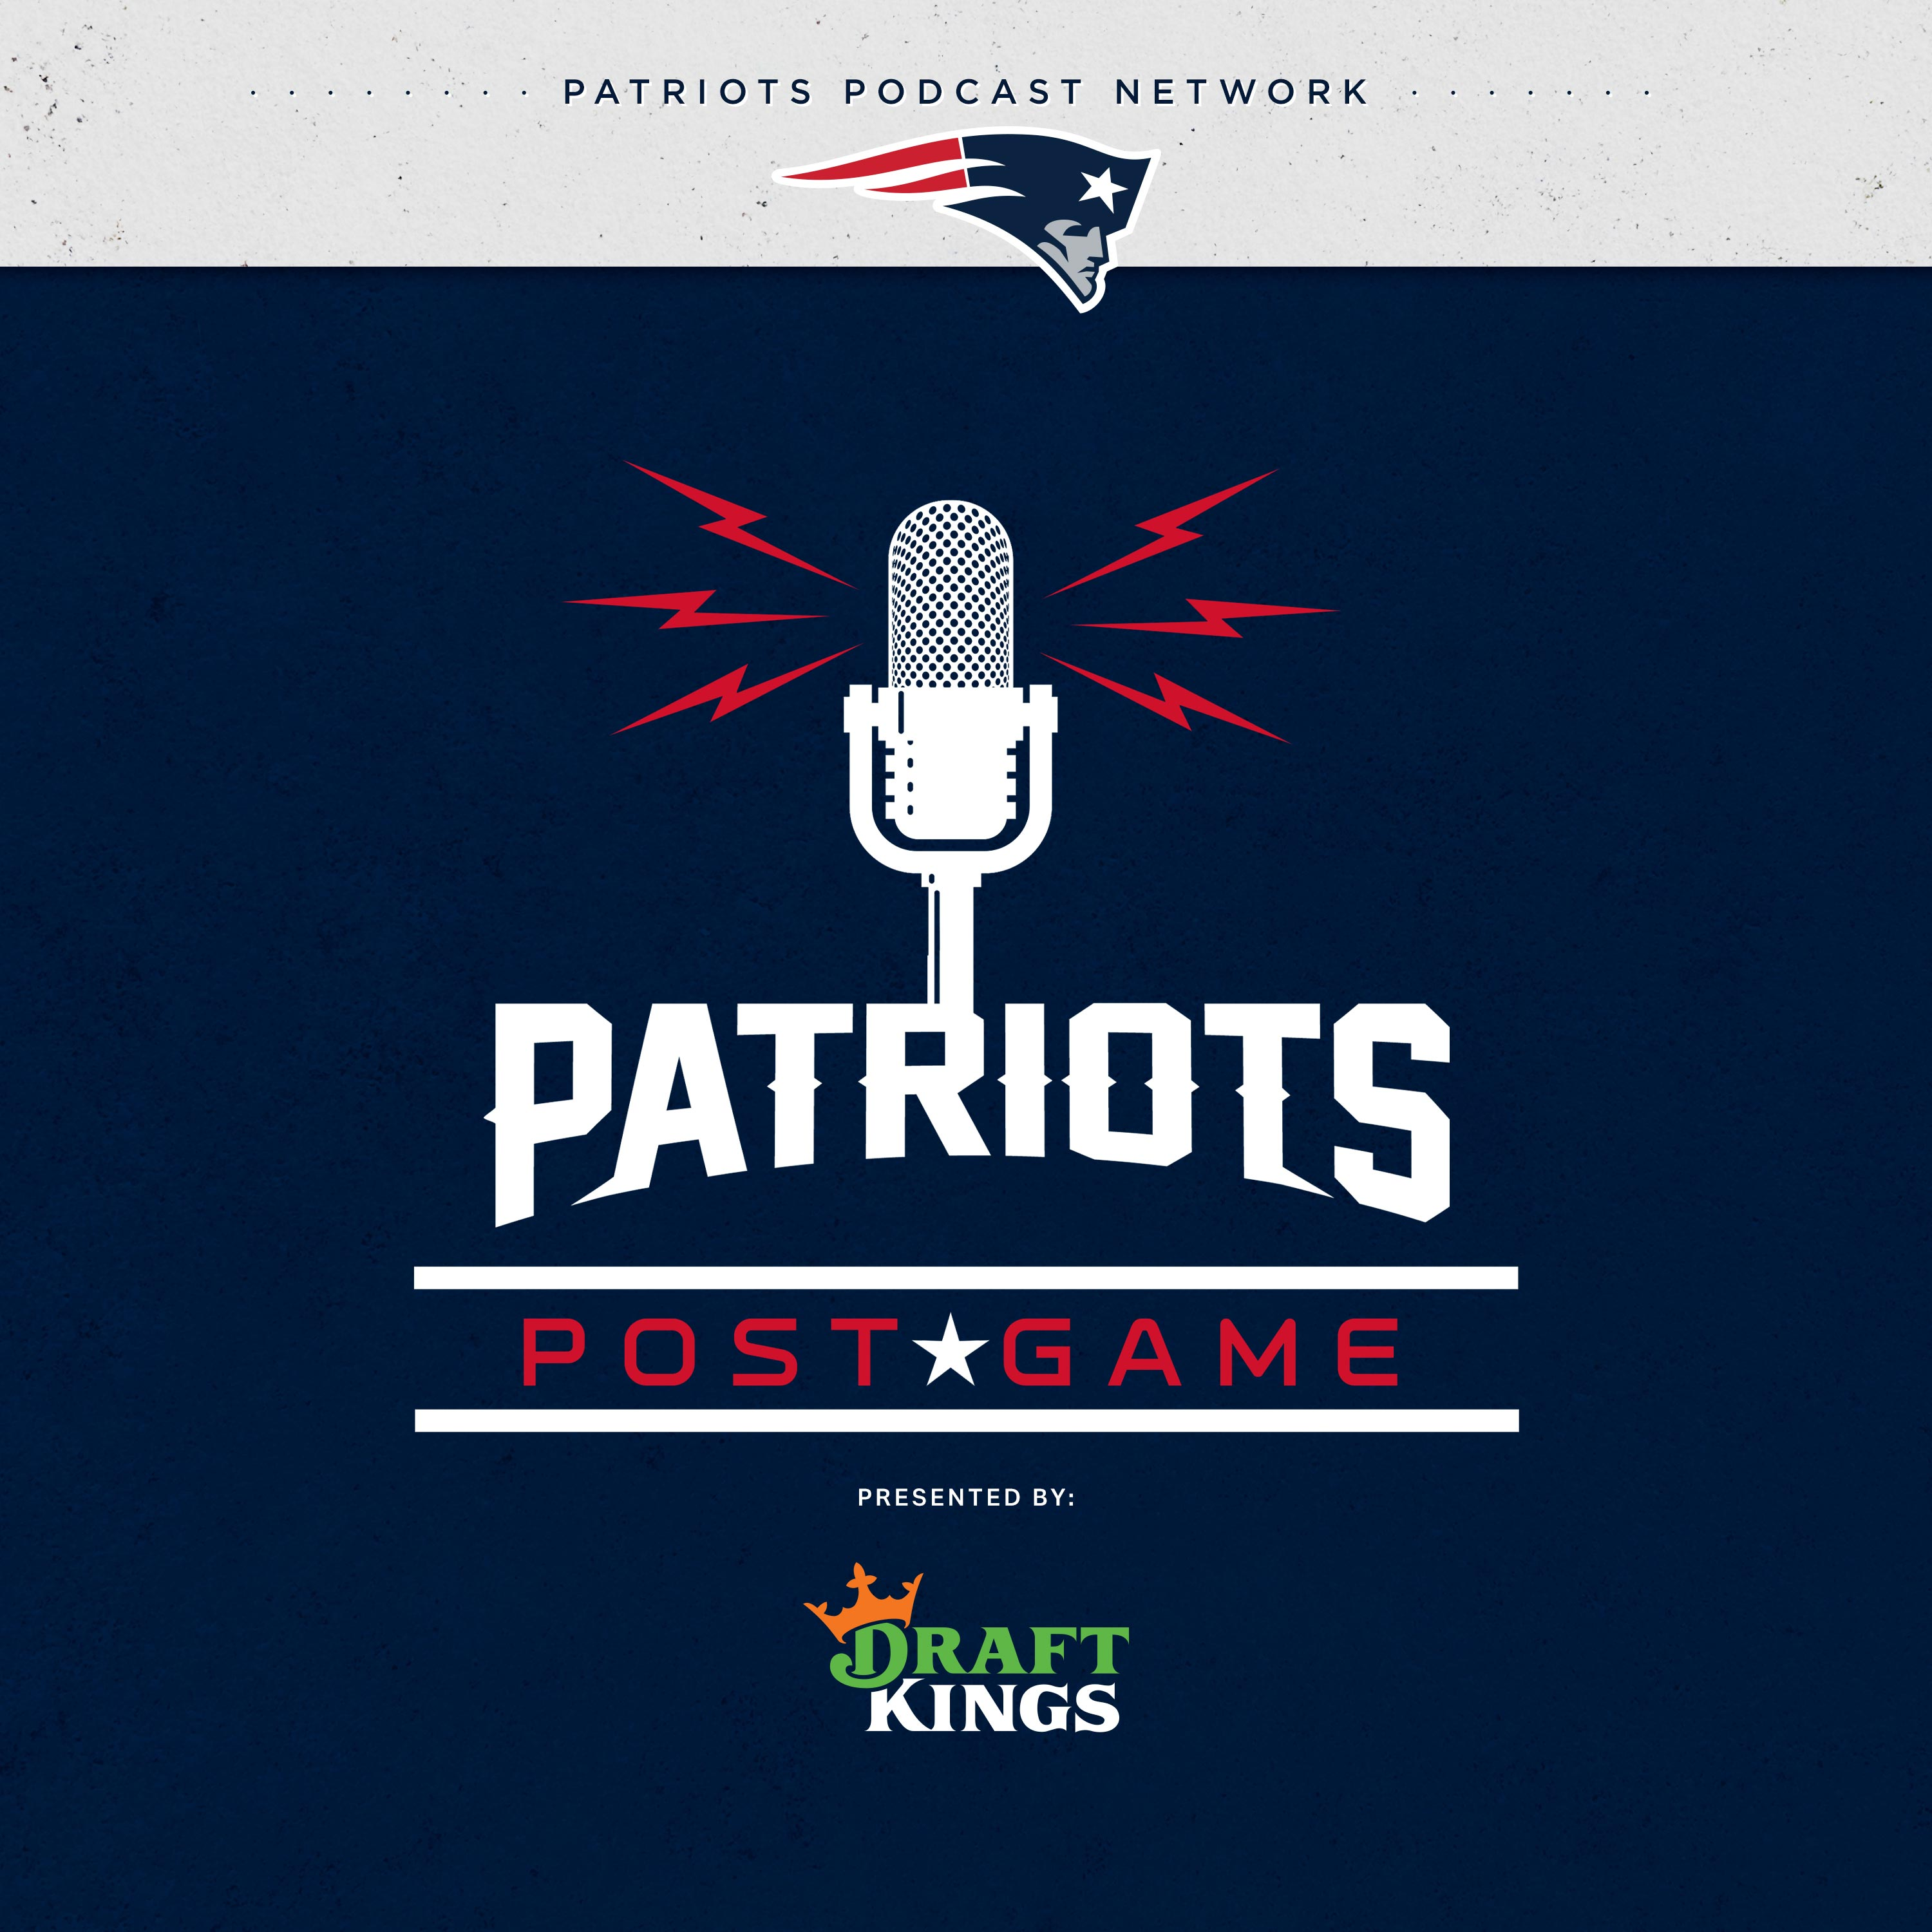 Patriots Postgame Show 12/24: Full Analysis of Last Second Win Over the Broncos